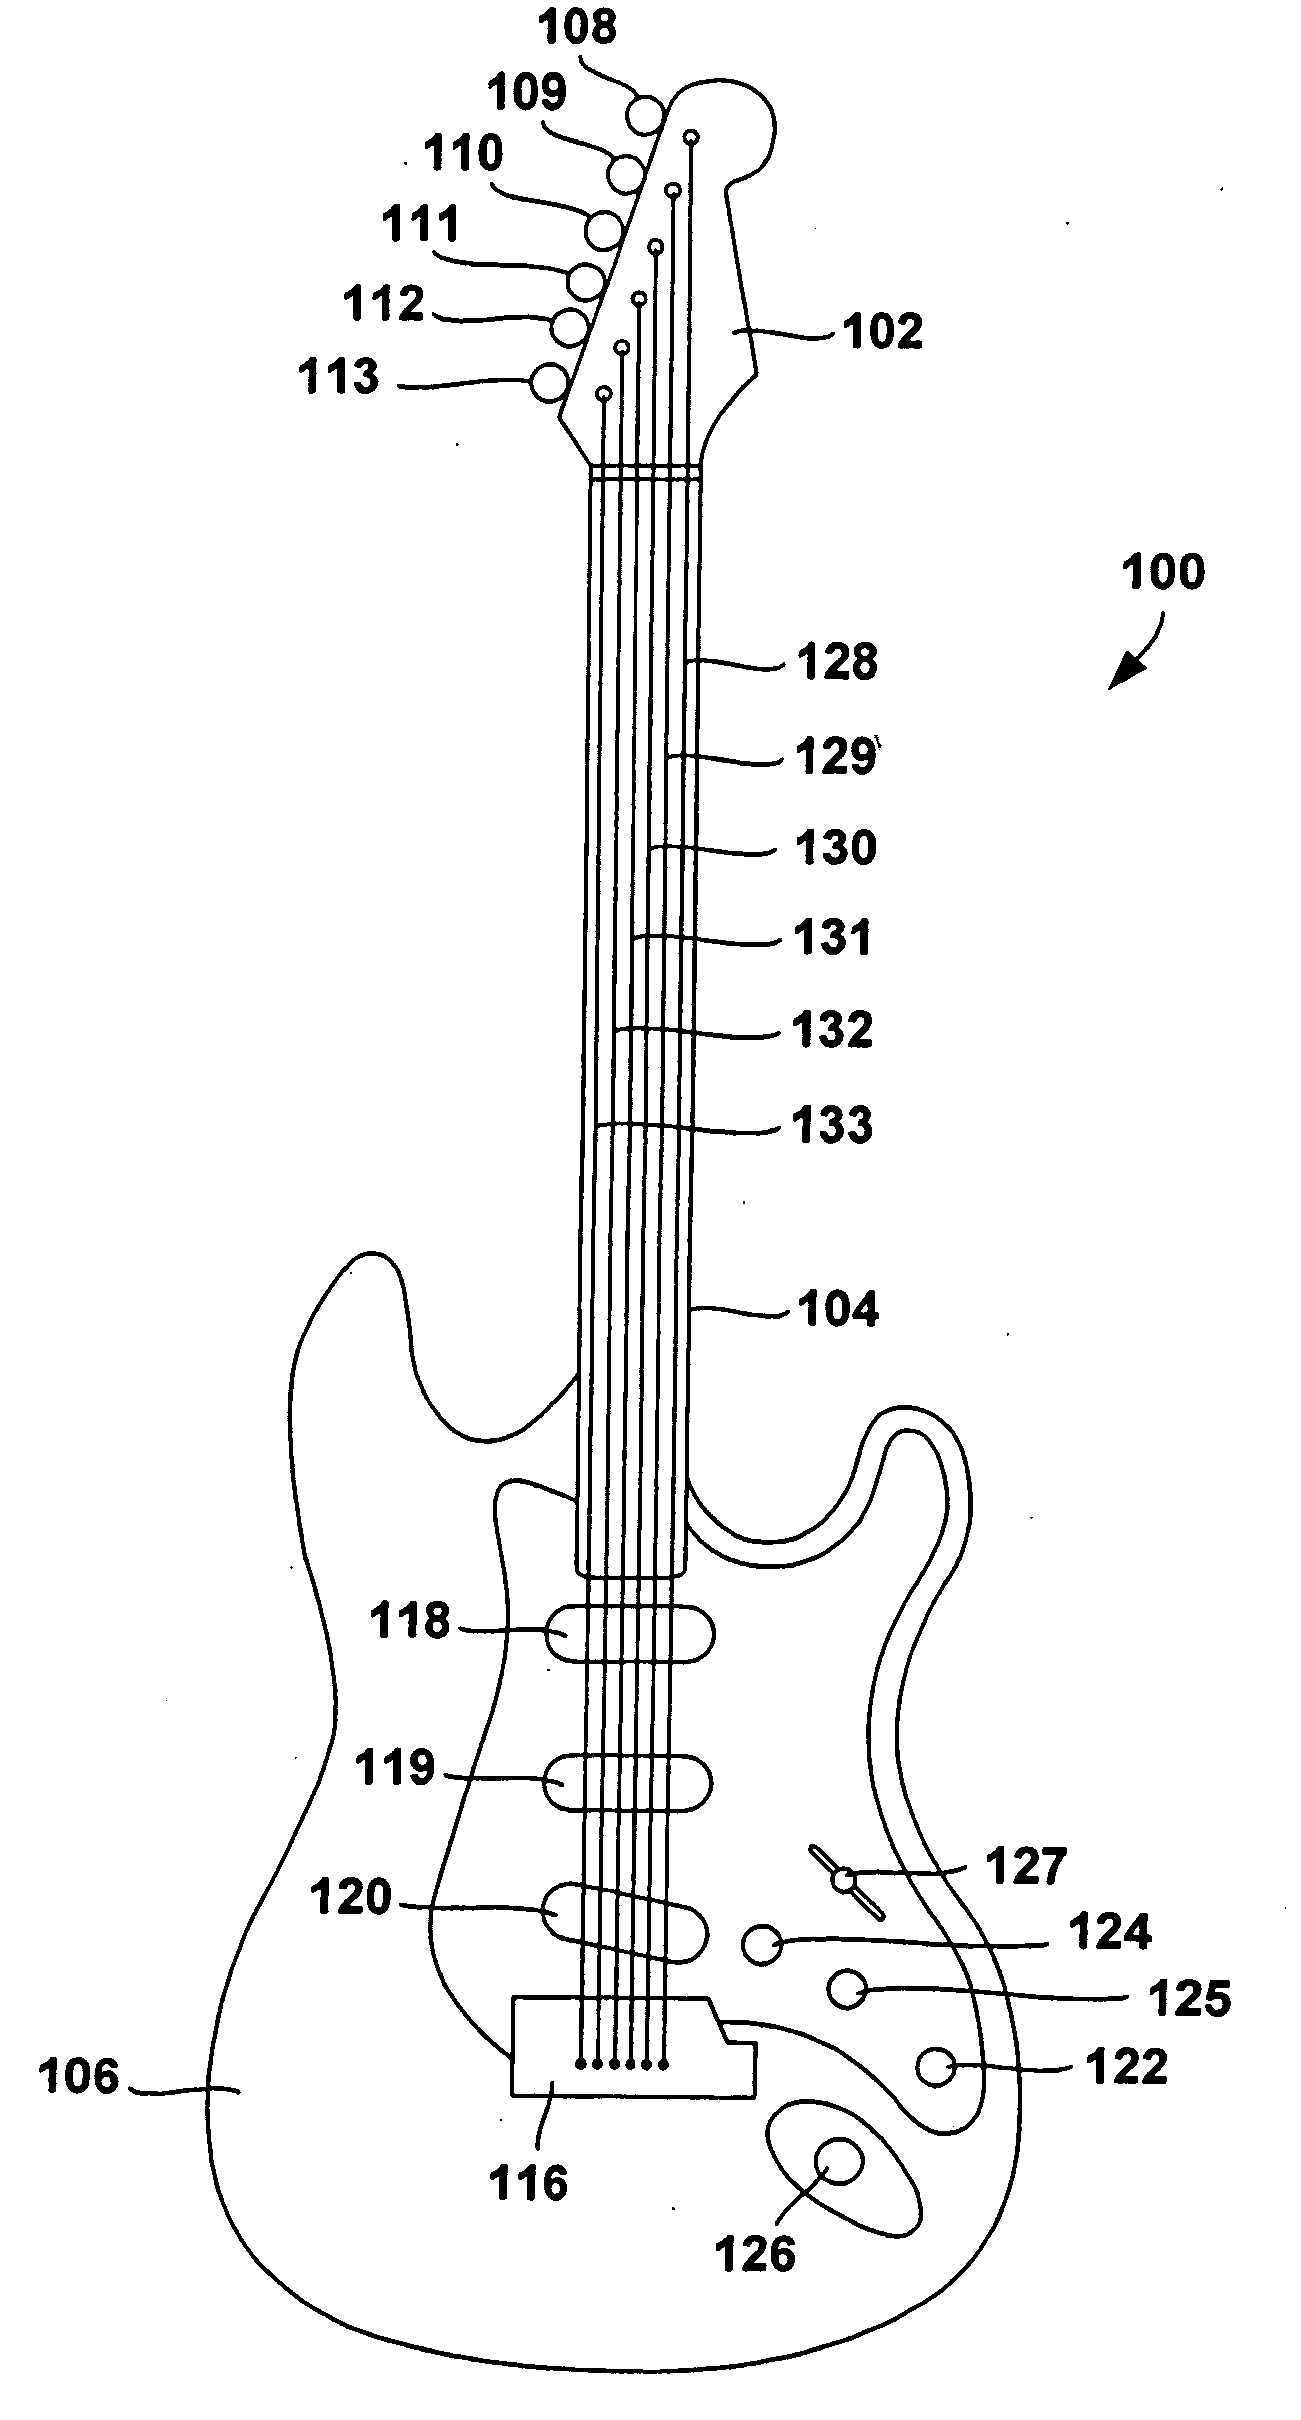 Enhanced knob for use with an electric stringed musical instrument